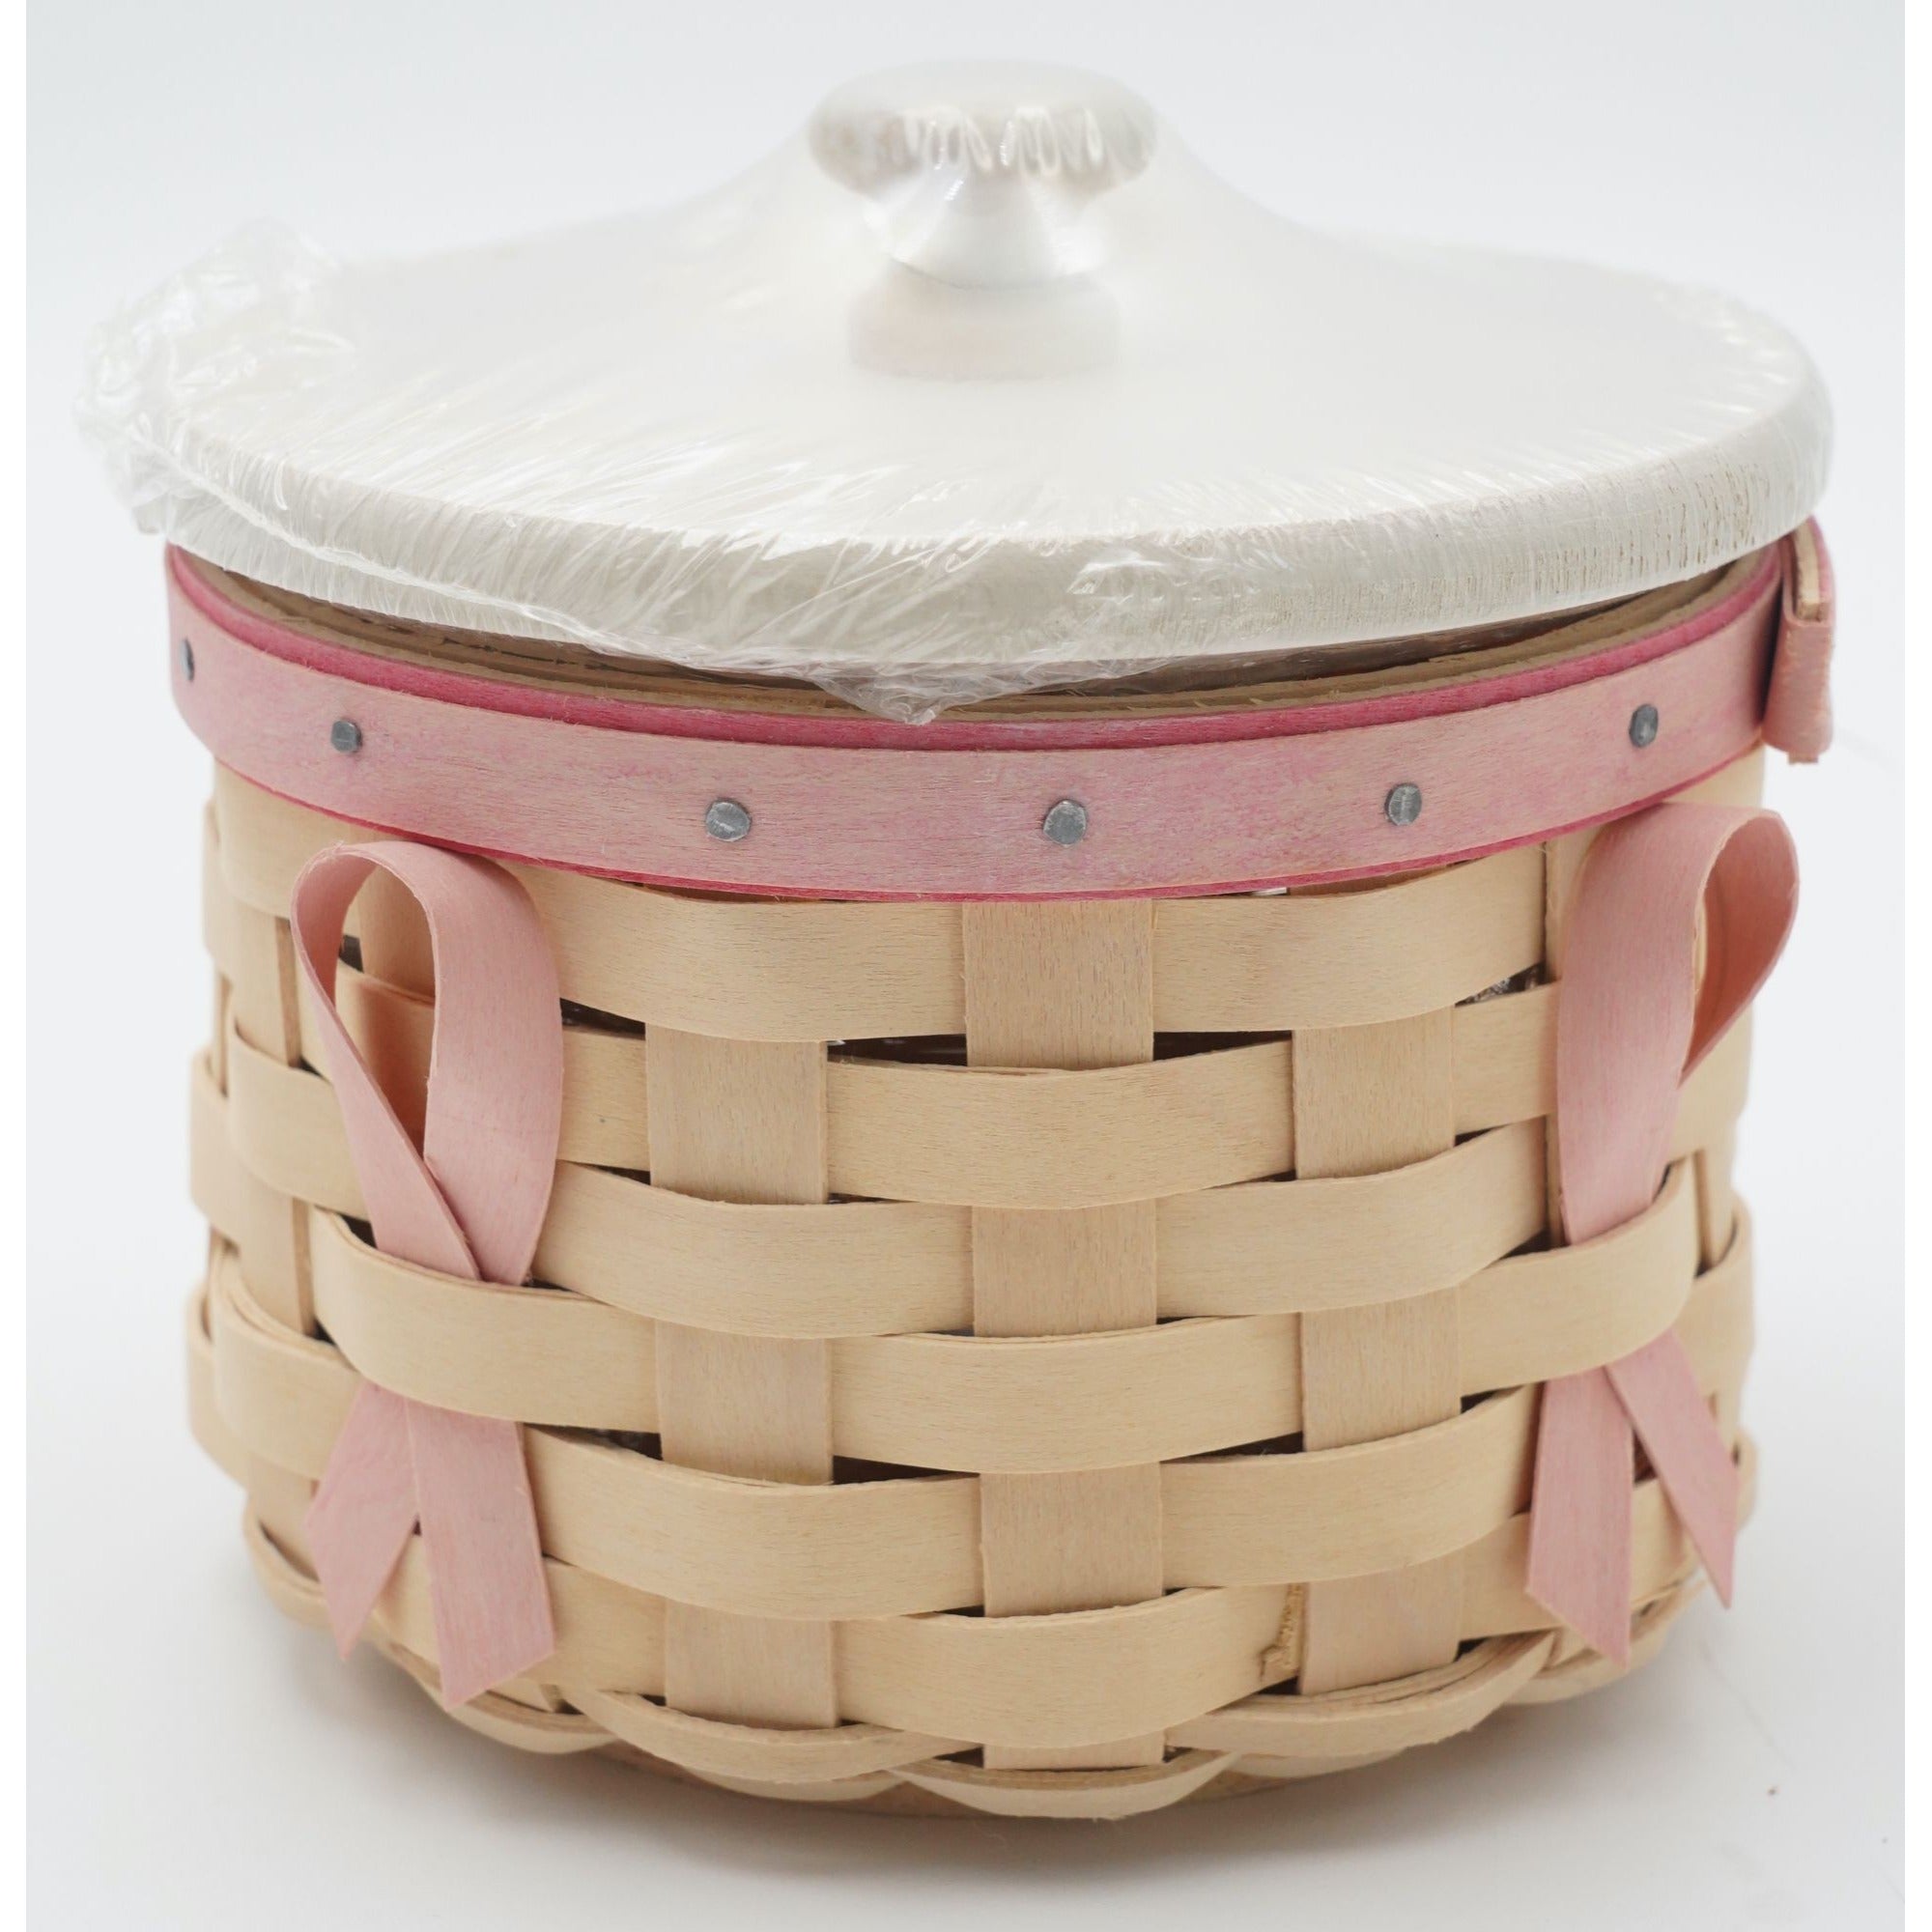 Longaberger 2006 Horizon of Hope Basket with Lid, Tie-on, Liner, Protector